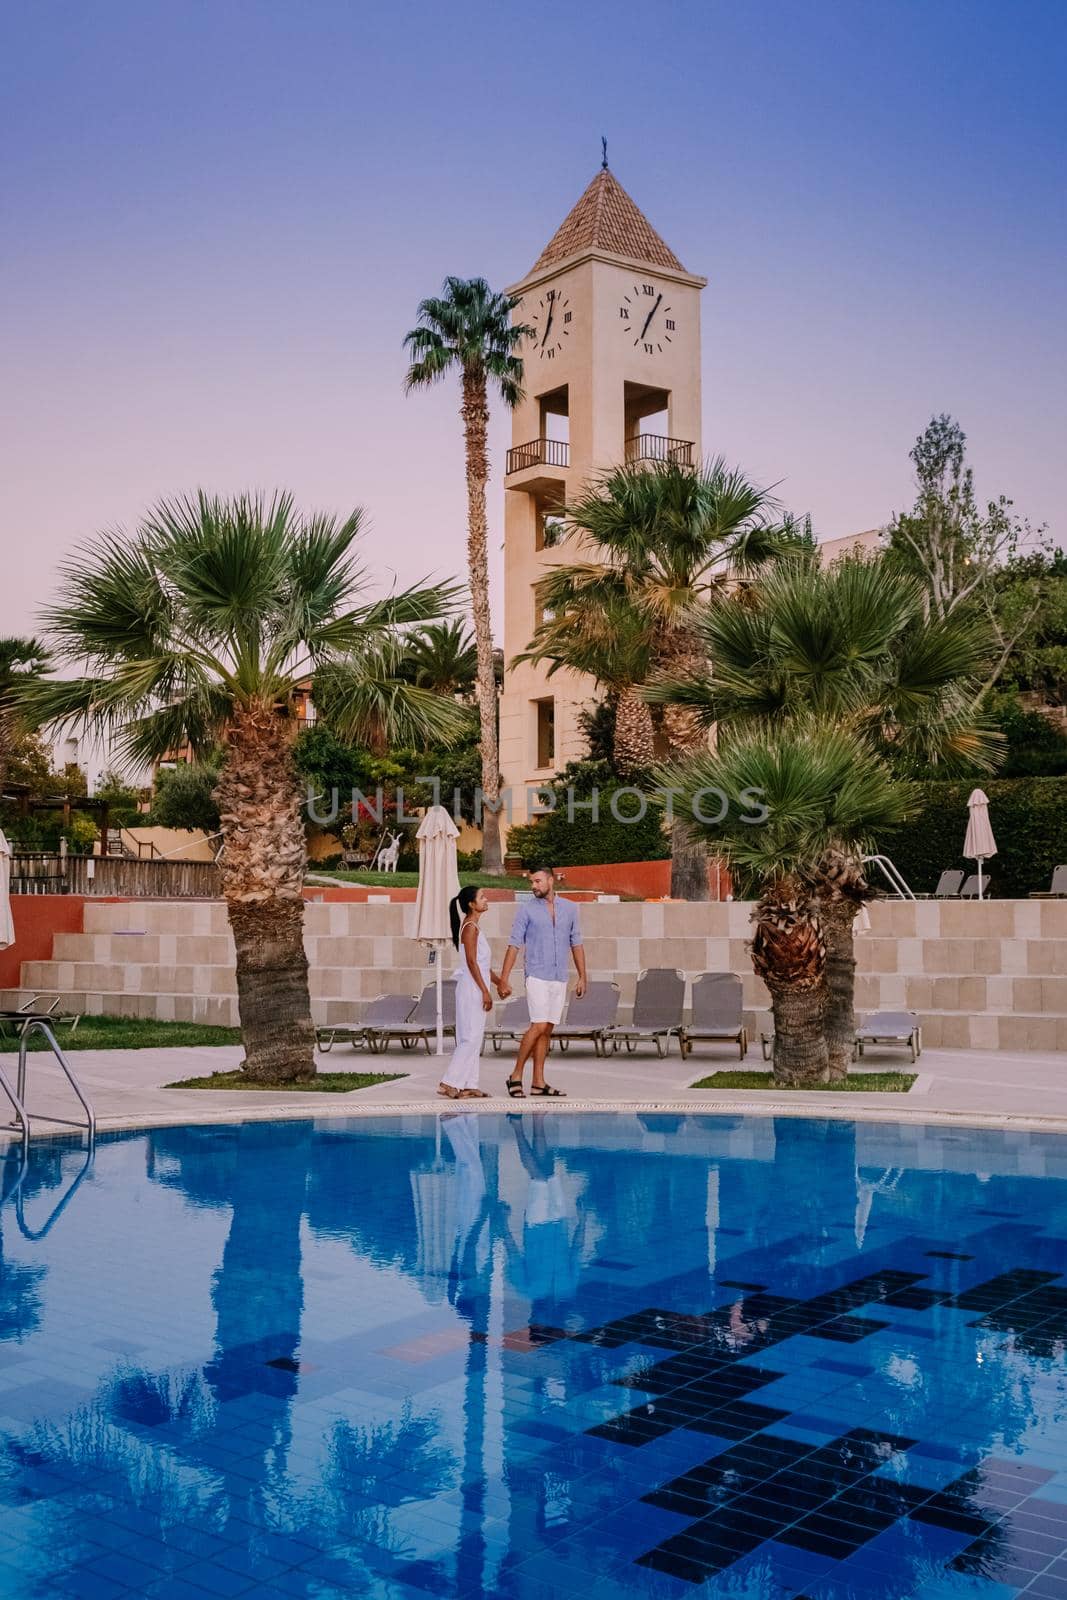 Crete Greece, Candia park village a luxury holiday village in Crete Greece by the ocean in traditional colors. Couple on vacation luxury resort